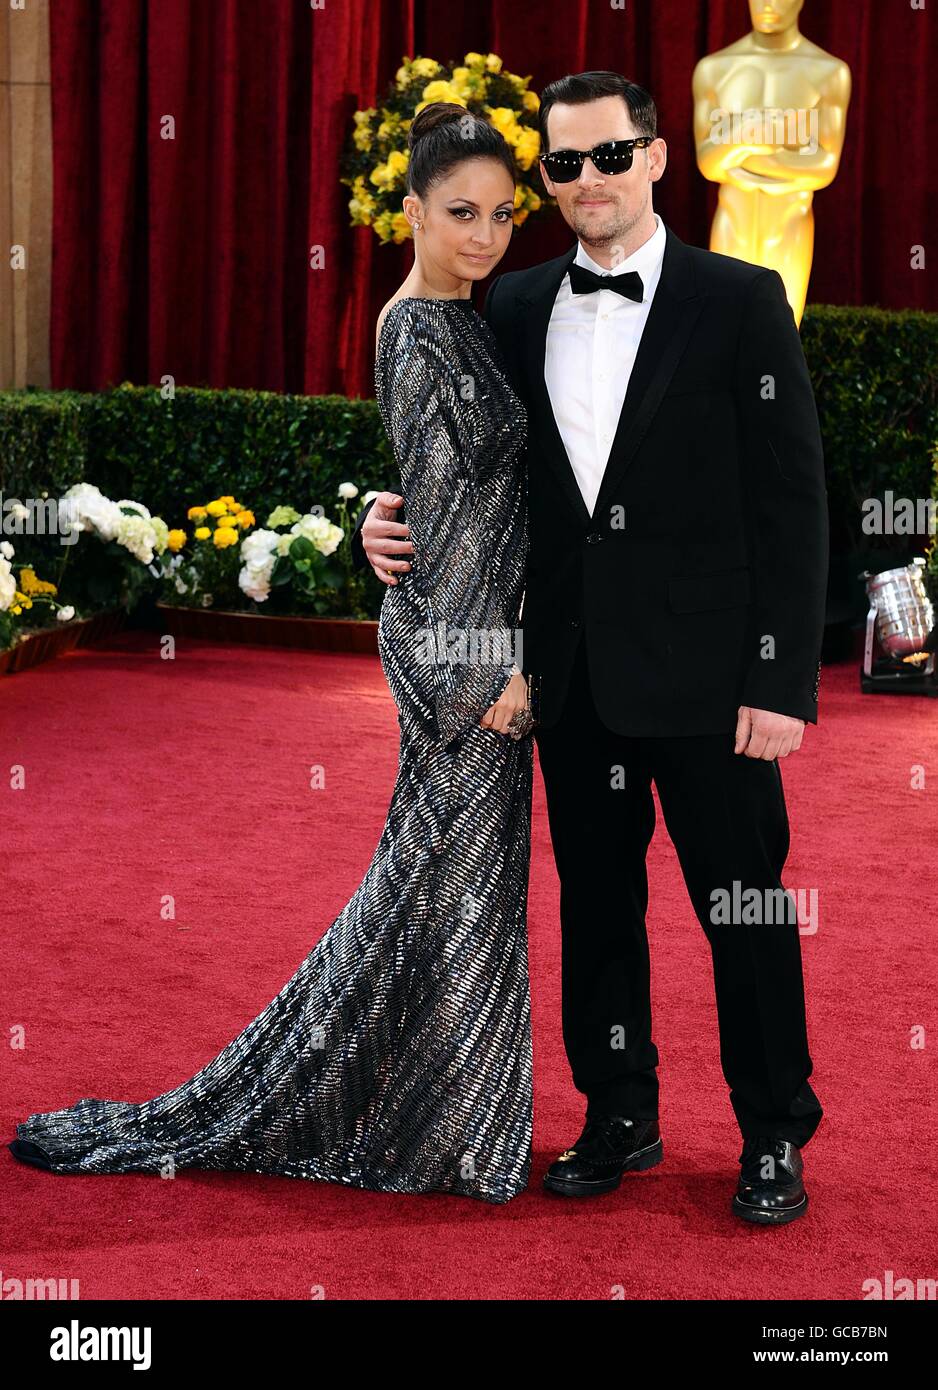 The 82nd Academy Awards - Arrivals - Los Angeles. Nicole Richie and Joel Madden arriving for the 82nd Academy Awards at the Kodak Theatre, Los Angeles. Stock Photo